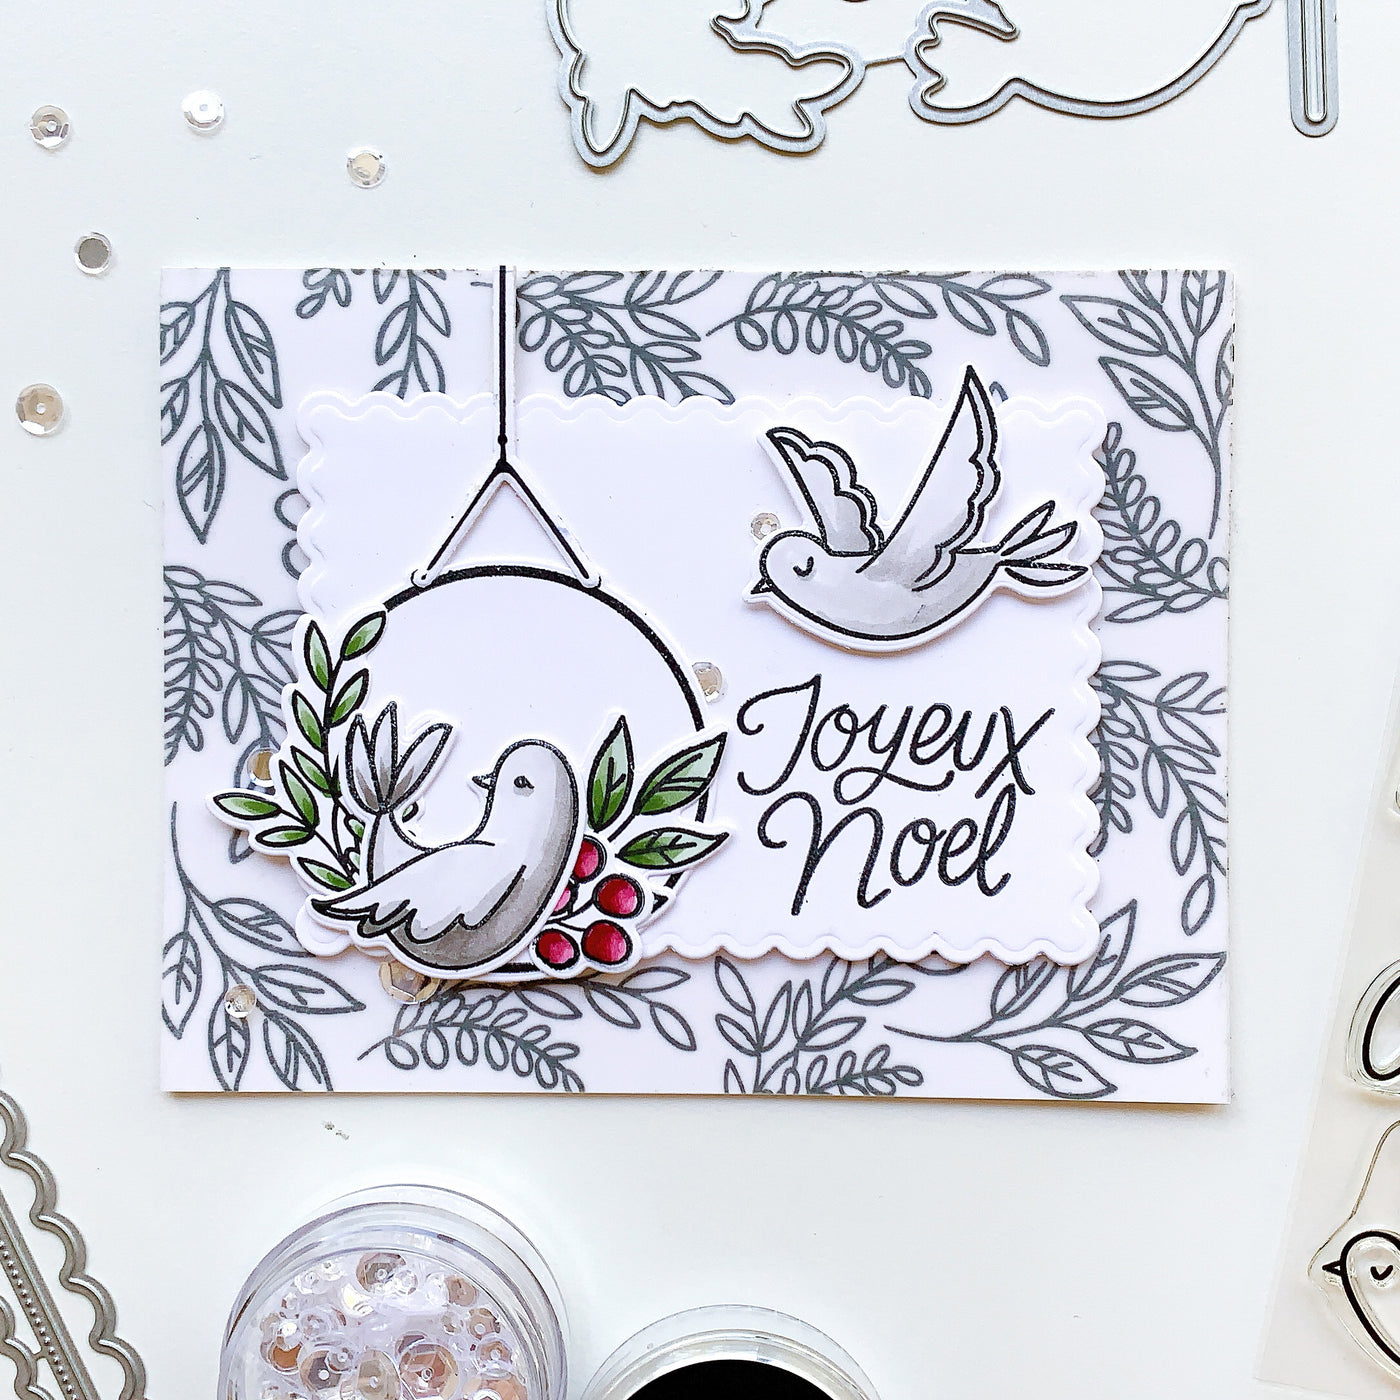 Catherine Pooler Designs Decked Out Holiday Patterned Paper